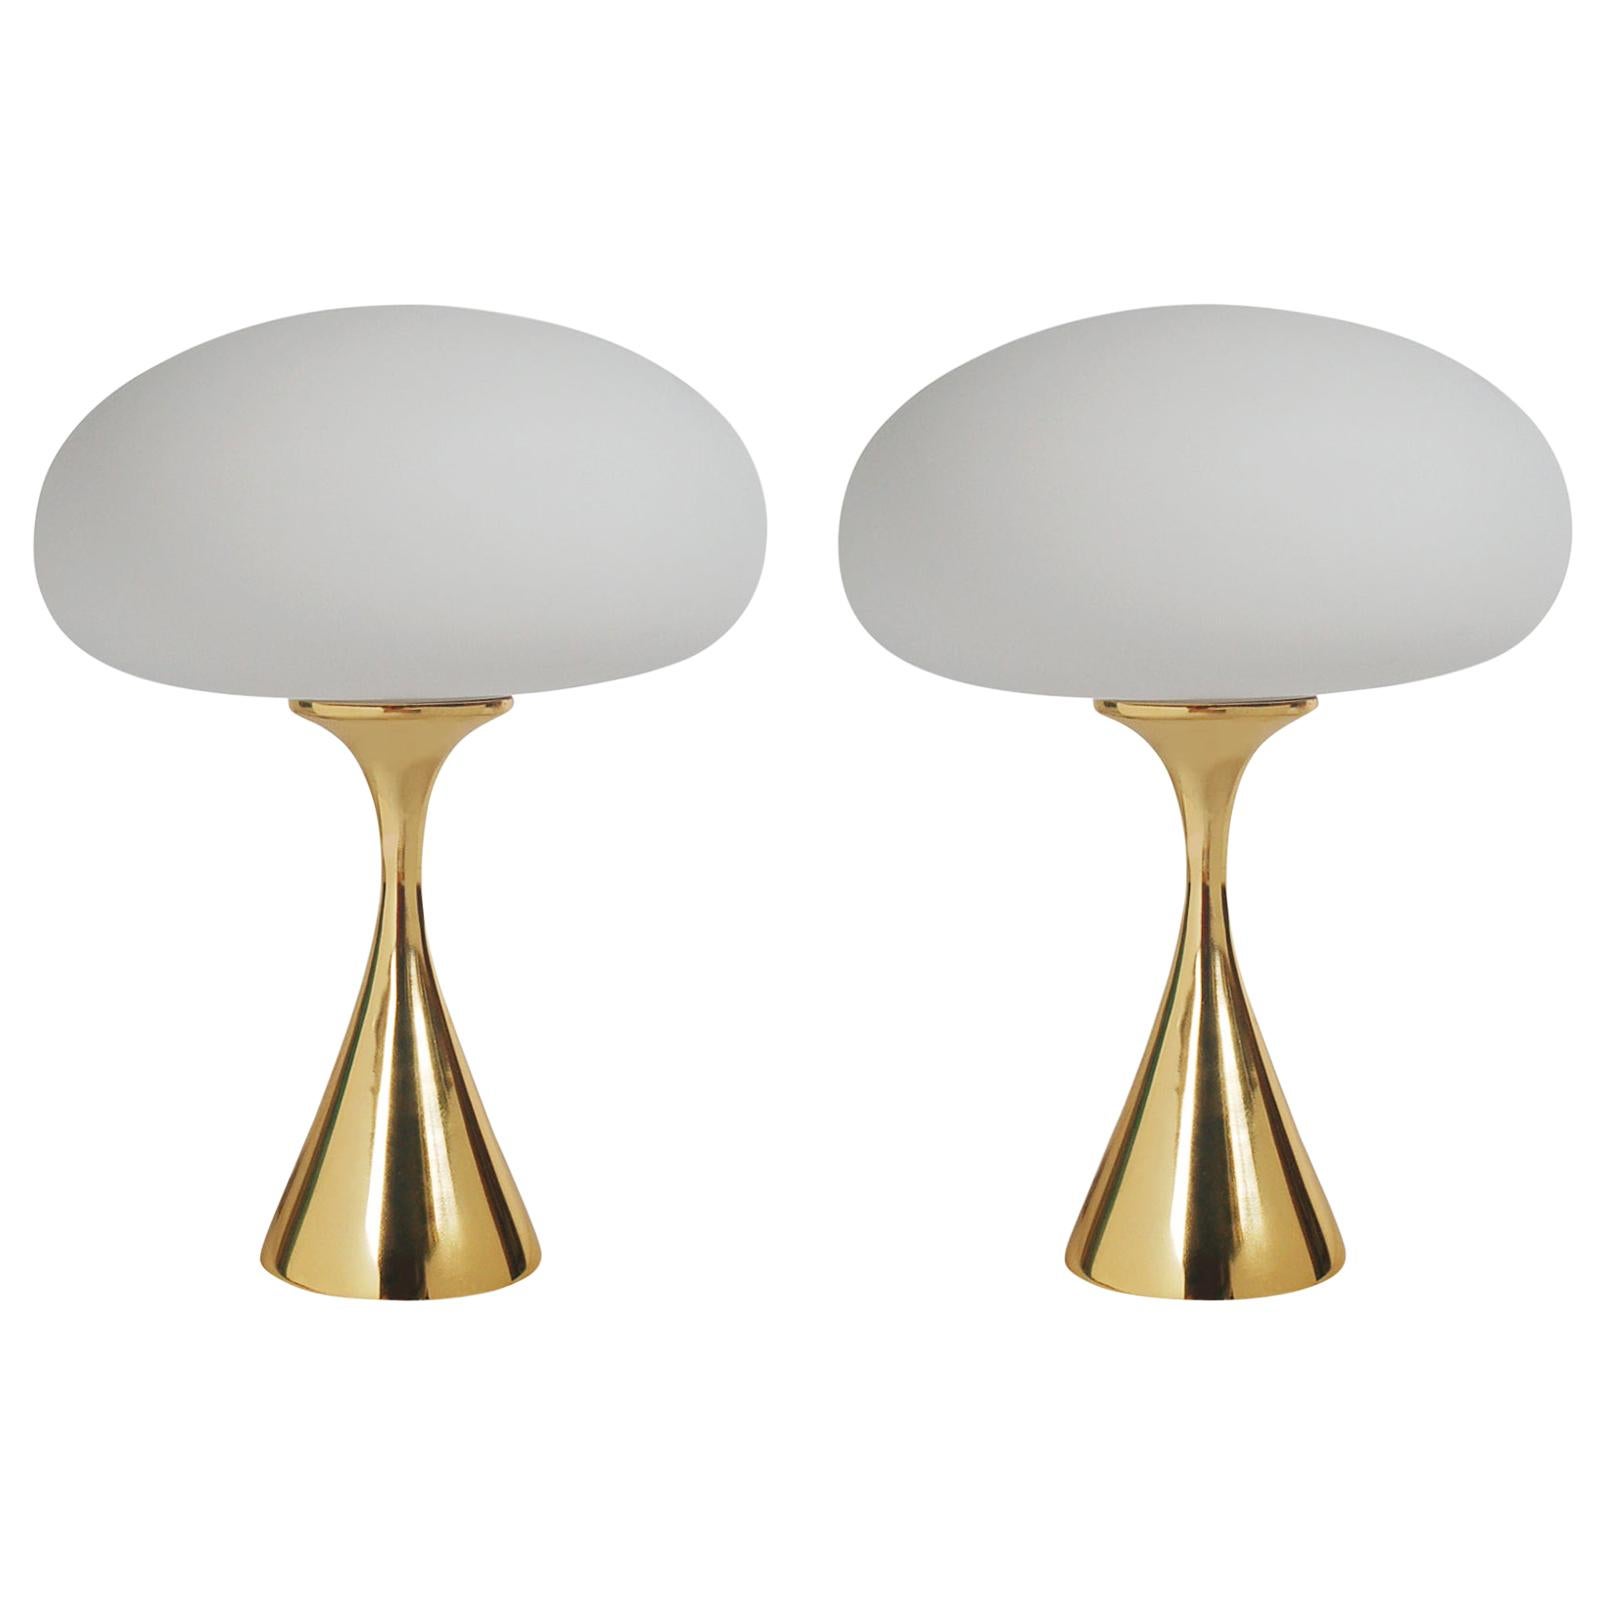 Pair of Mid-Century Modern Laurel Mushroom Table Lamps in Brass by Bill Curry